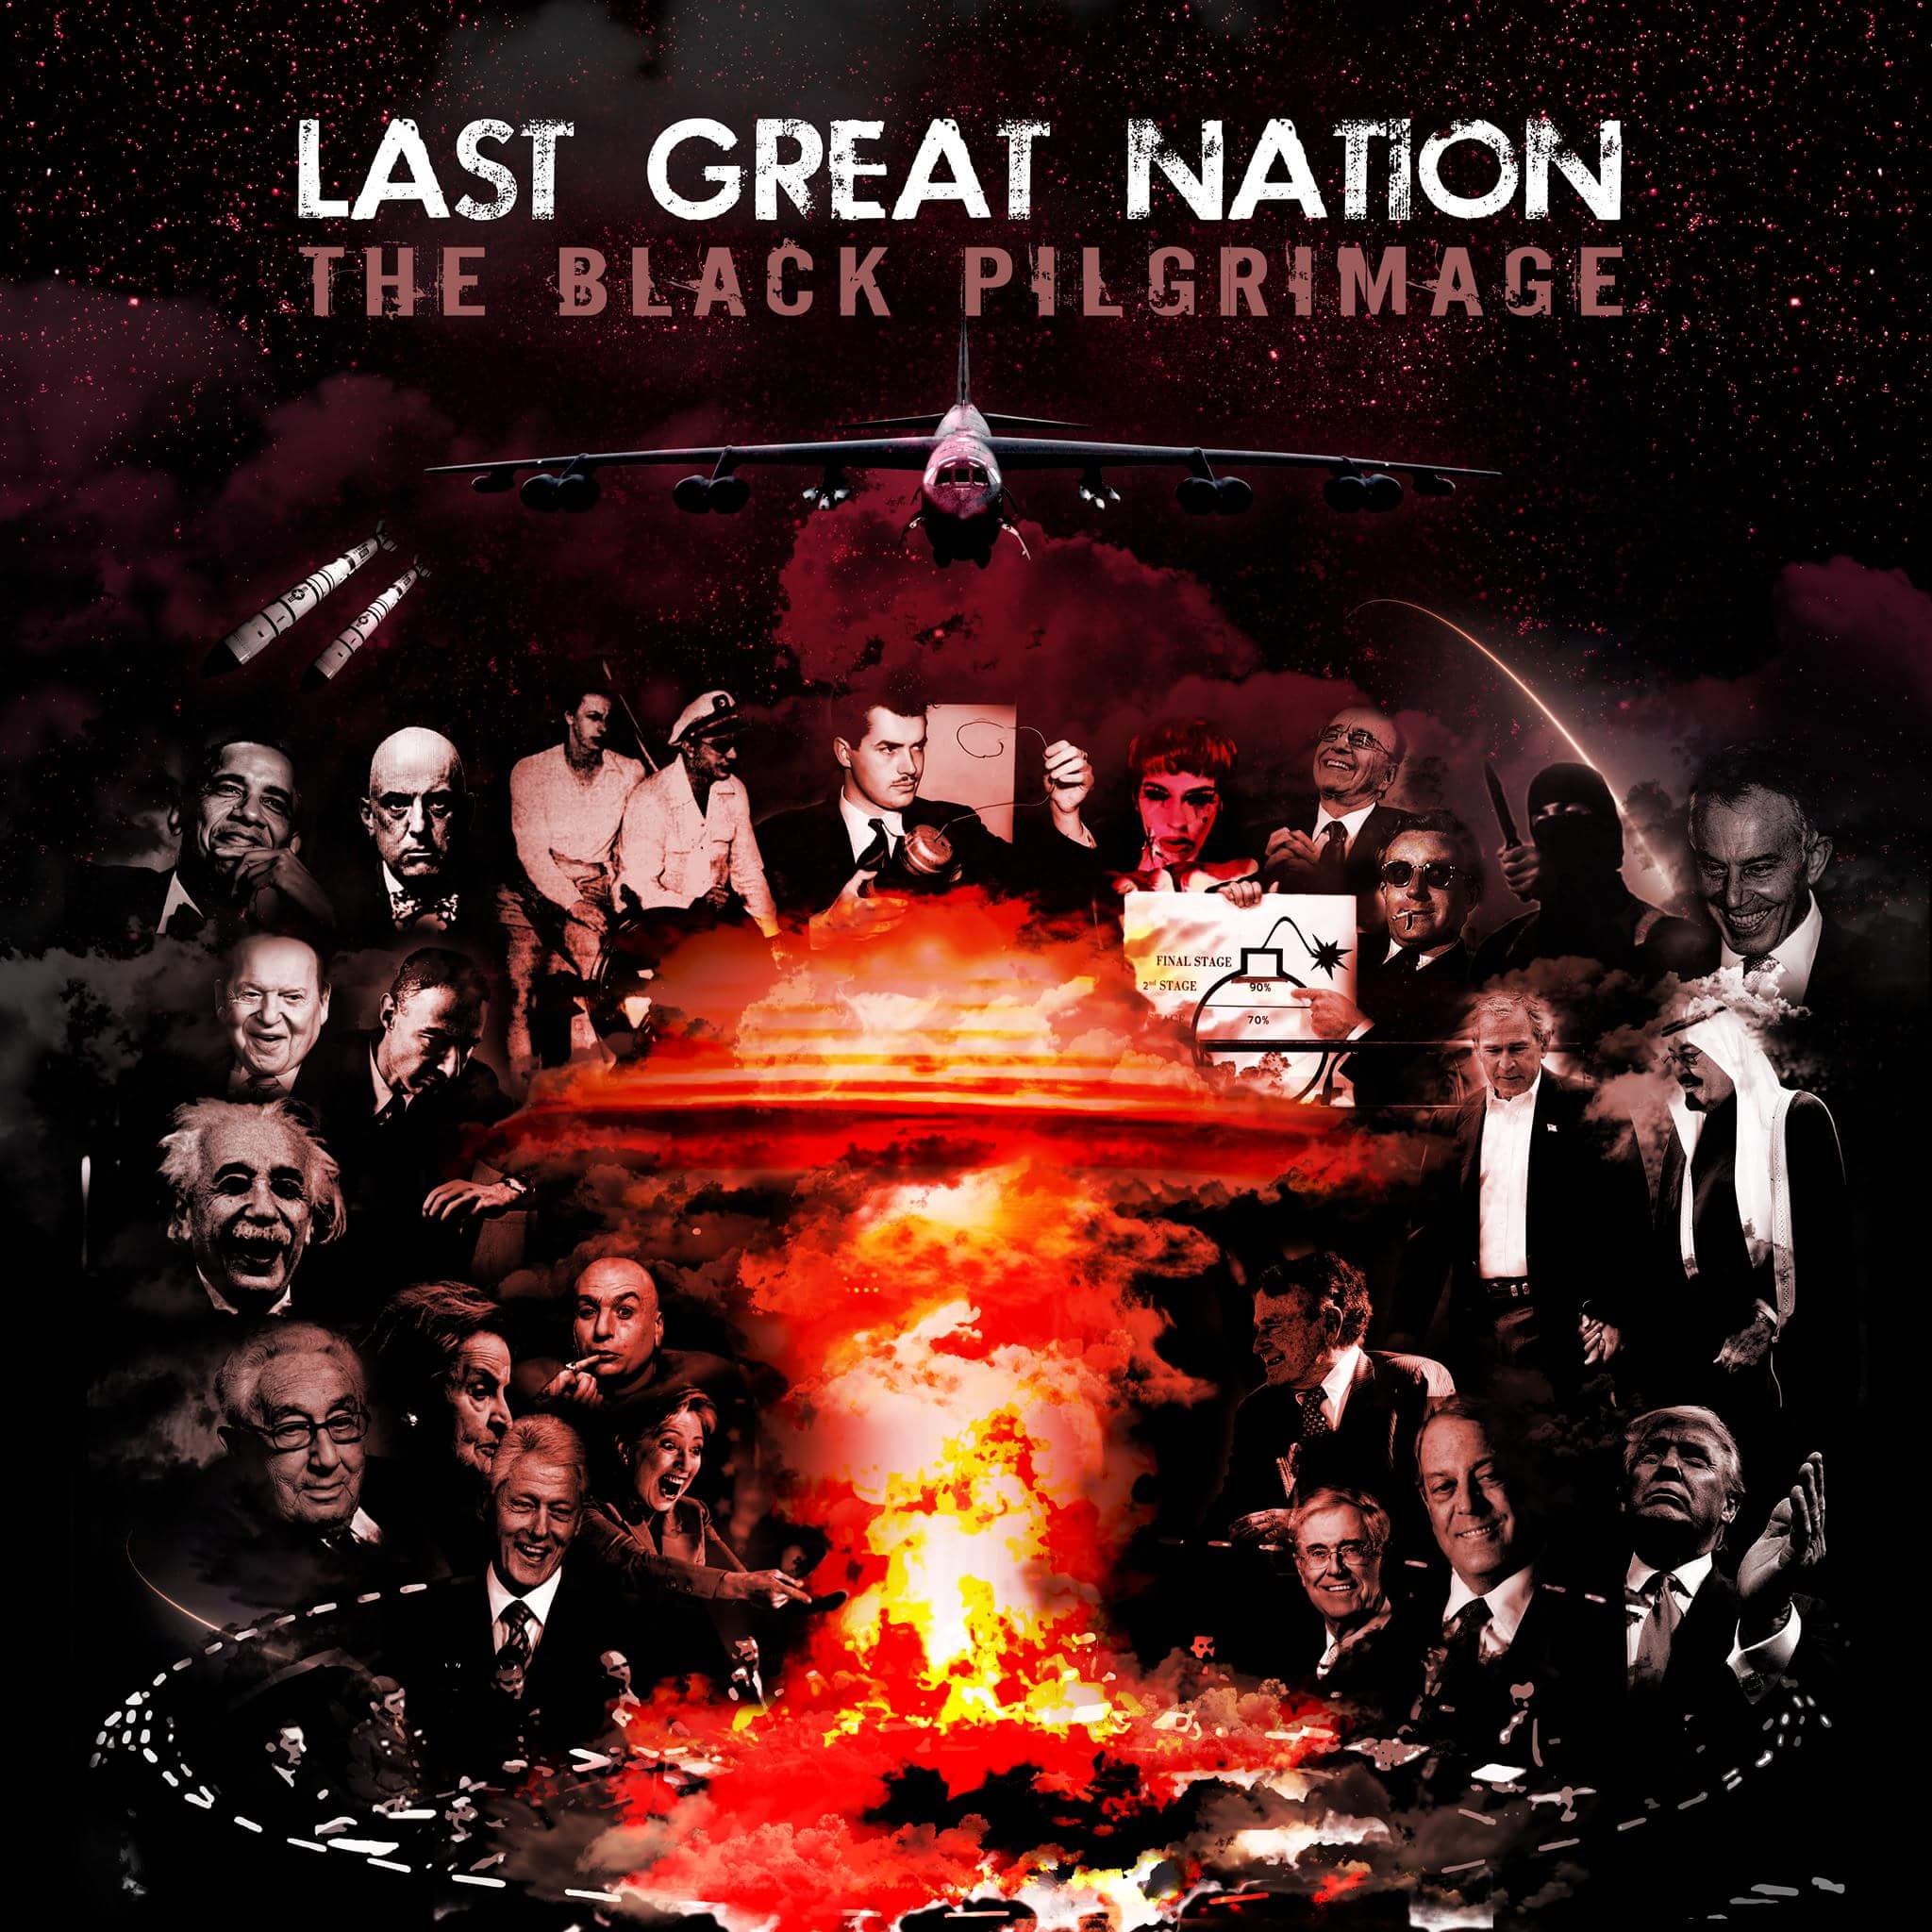 Last Great Nation - "The Black Pilgrimage" Mixed and Mastered at Ultimate Studios, Inc